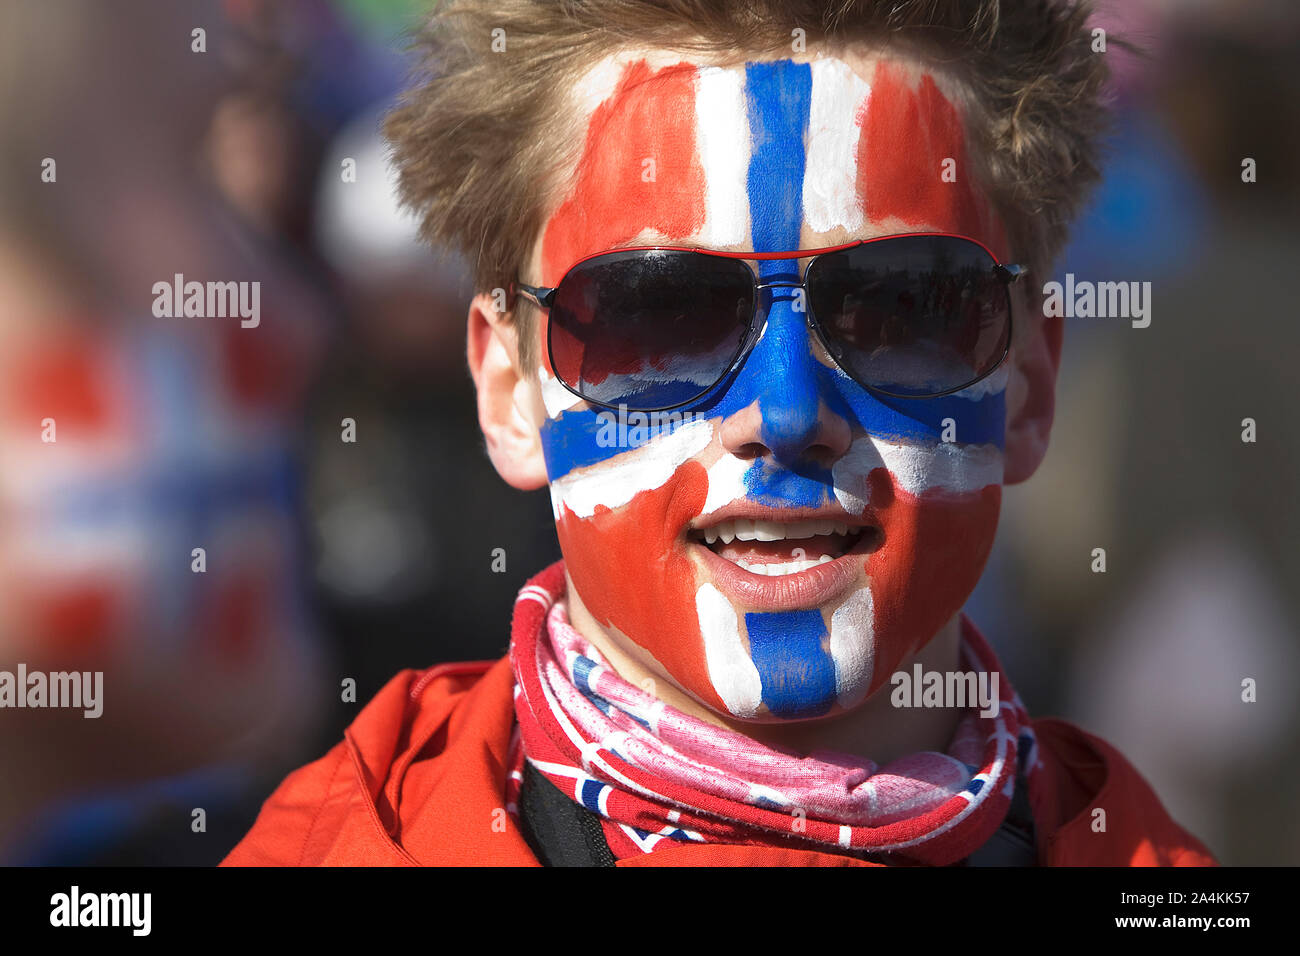 Norwegian Flag Painted On Man's Face Stock Photo